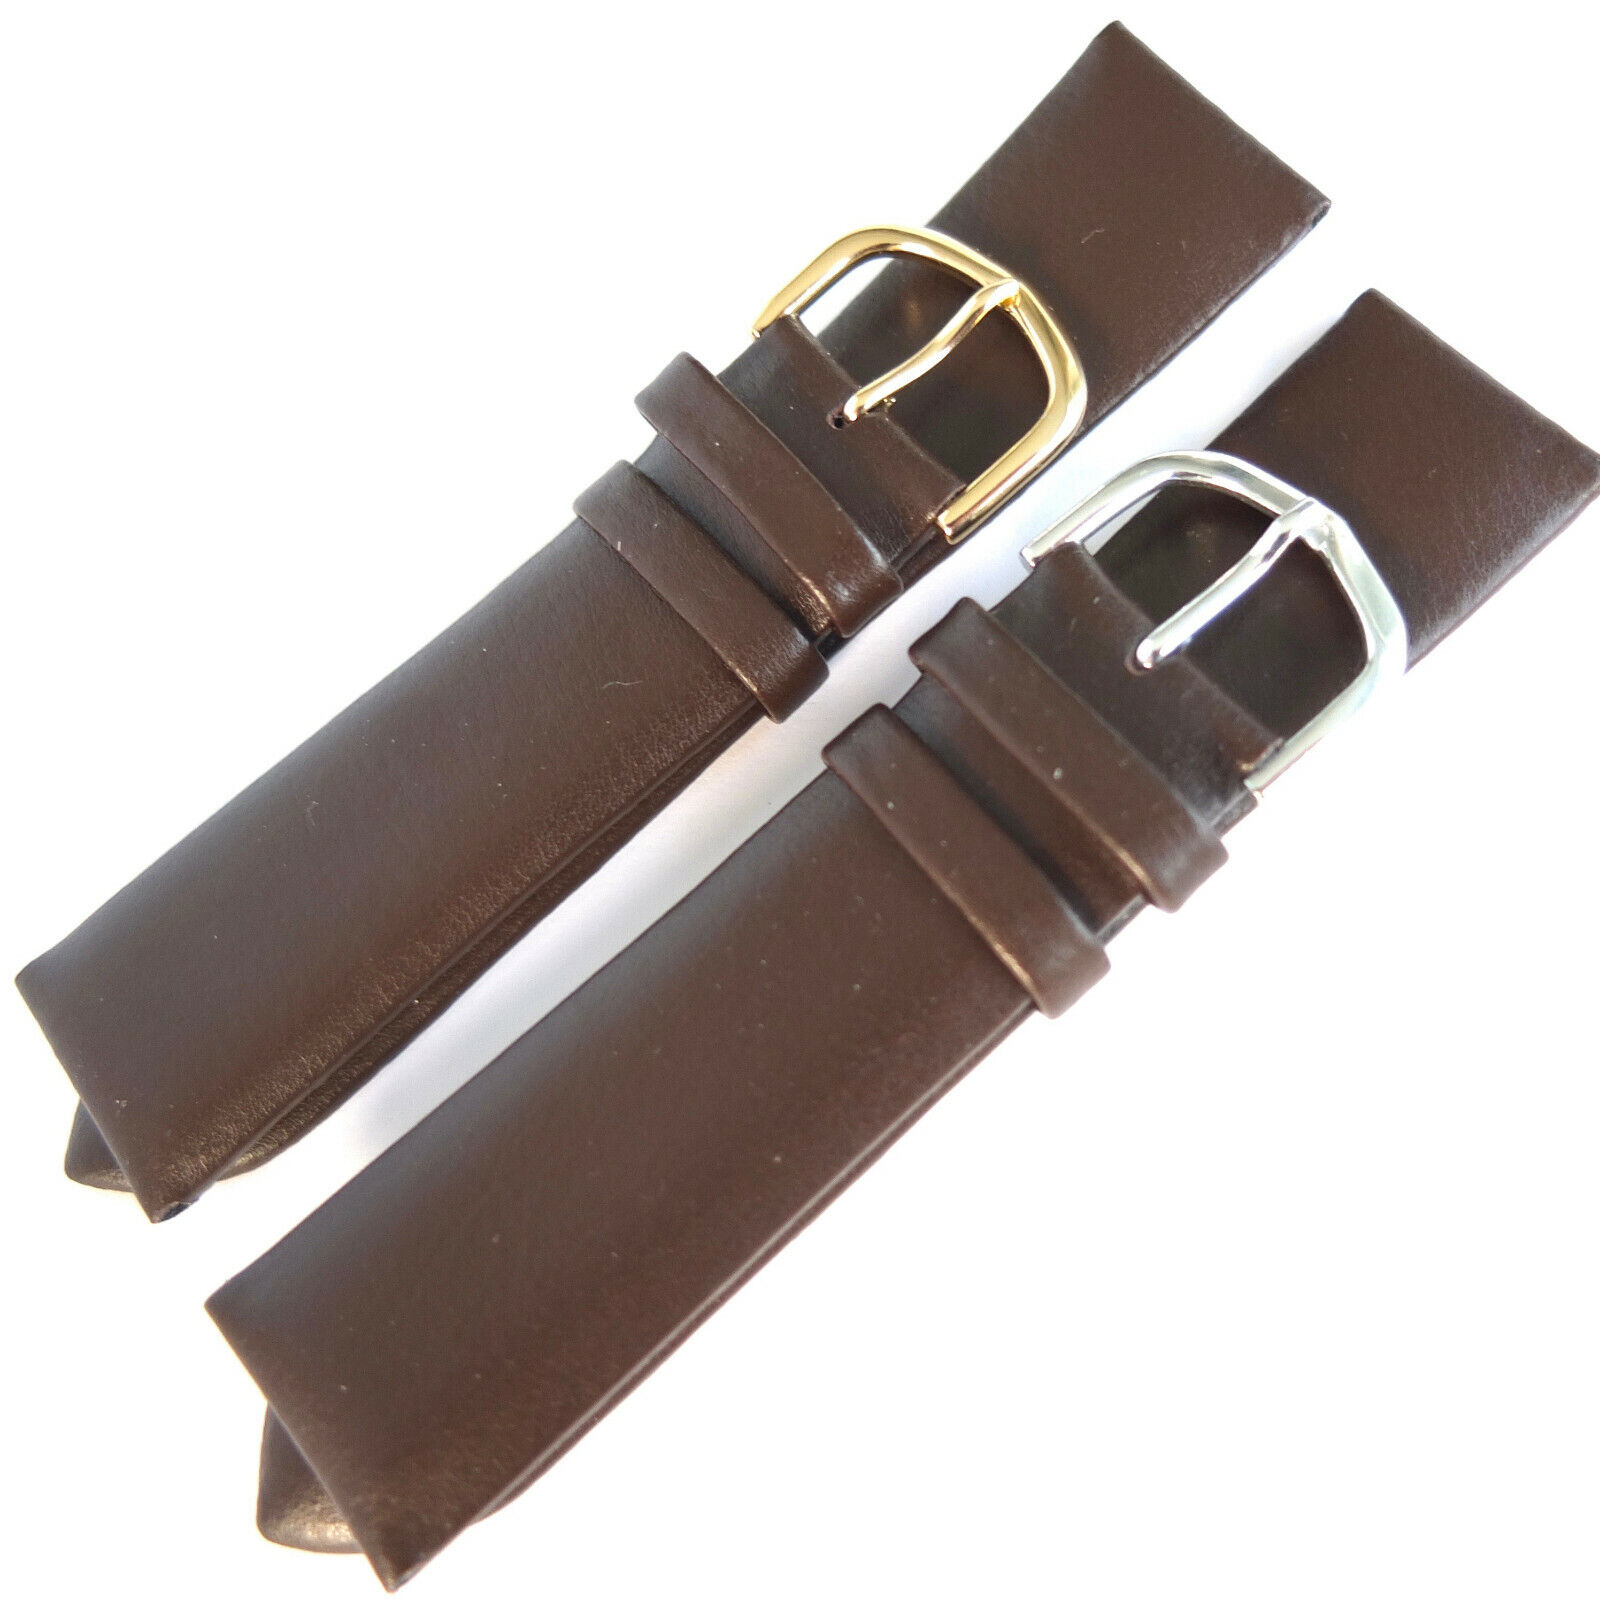 NEXT 22mm BROWN PADDED LEATHER WATCH STRAP. SOFT NON LEATHER LINING. GOLD or SIL